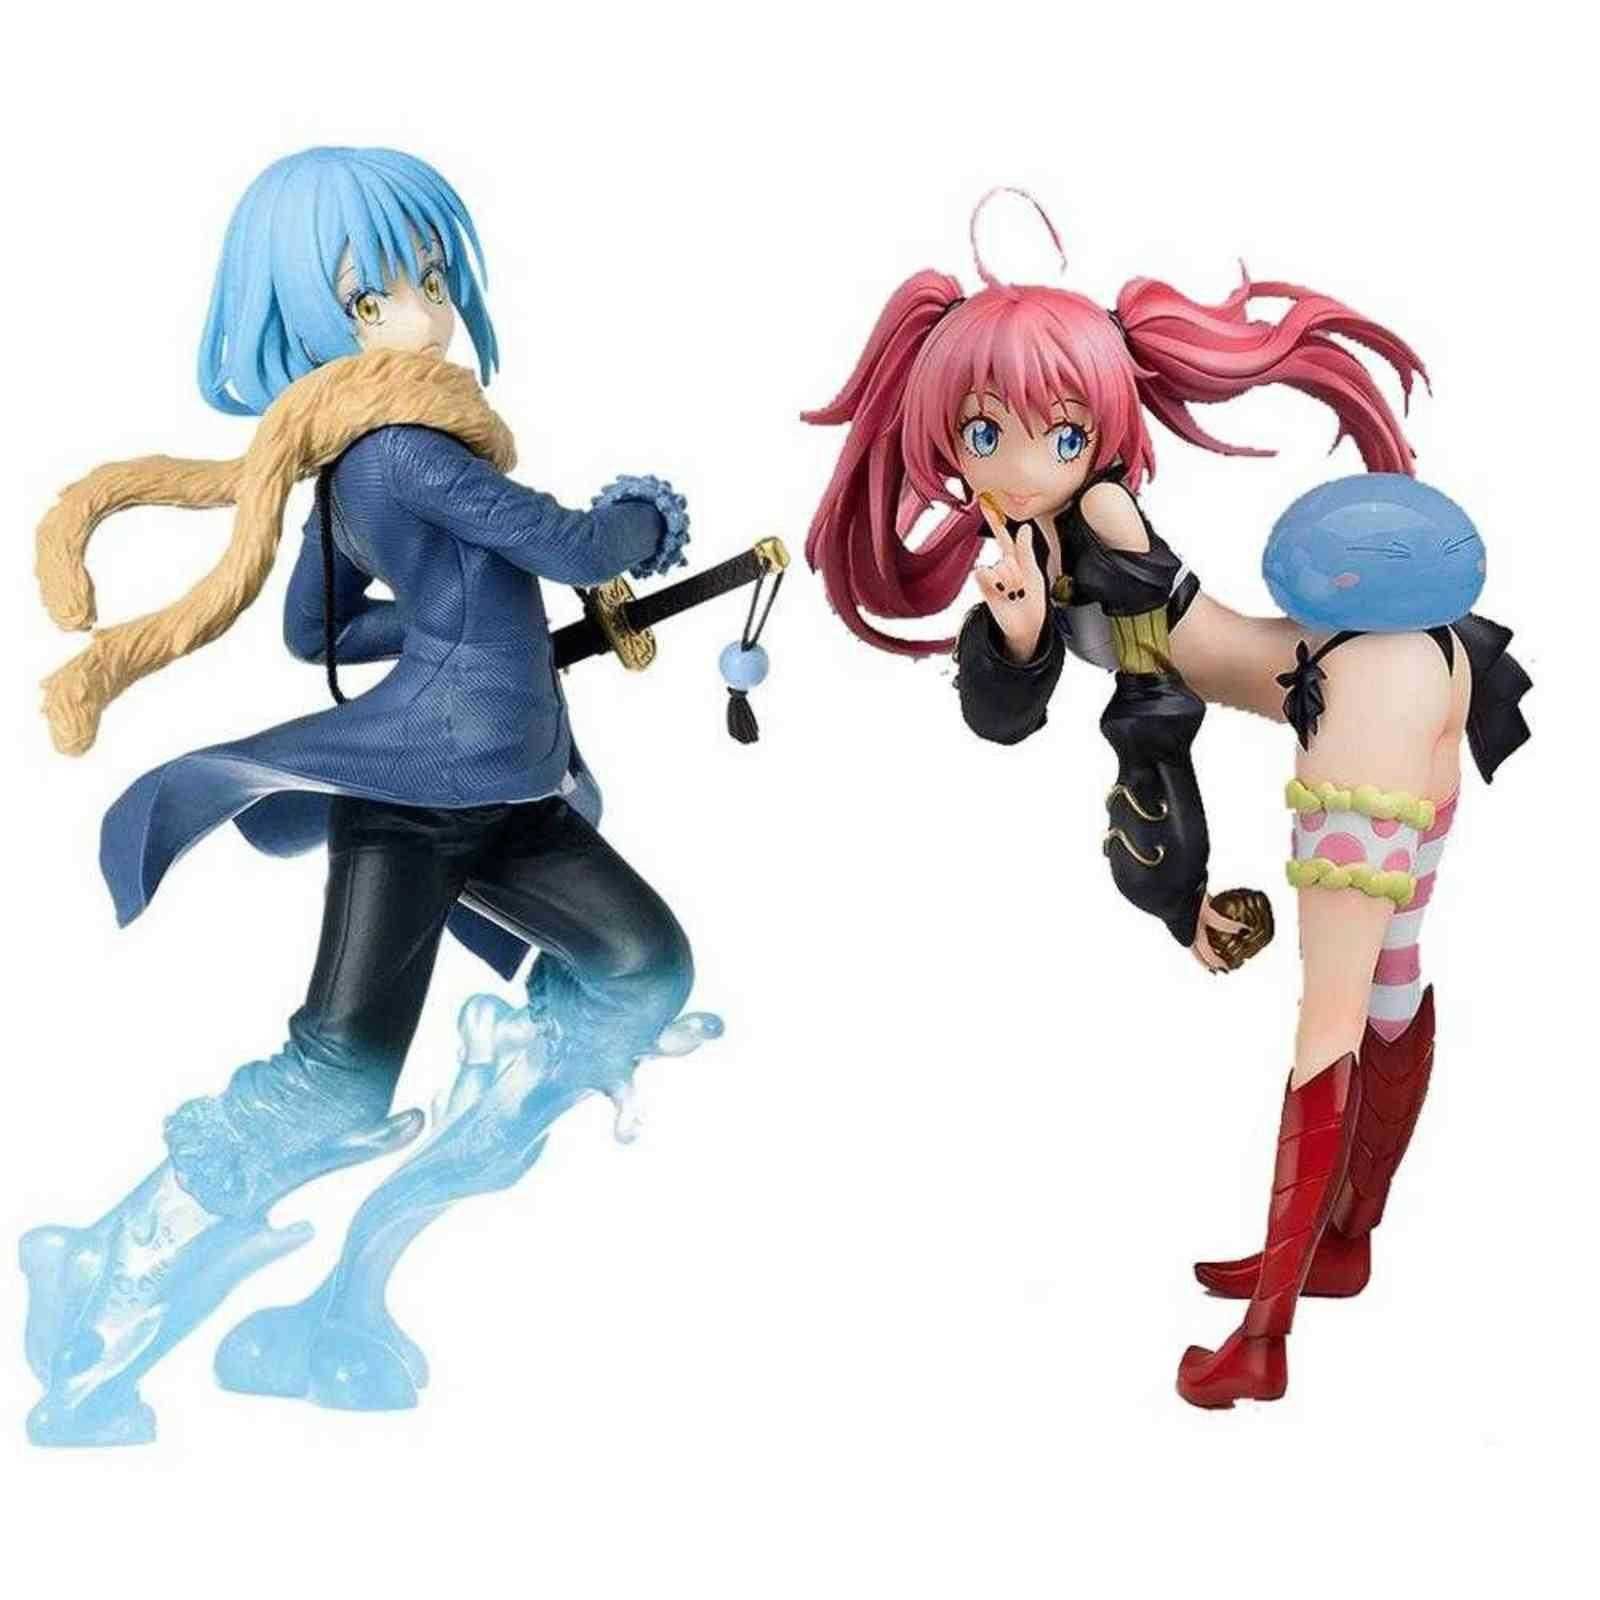 Anime That Time I Got Reincarnated as a Slime Action Figure Anime Figures Gifts 